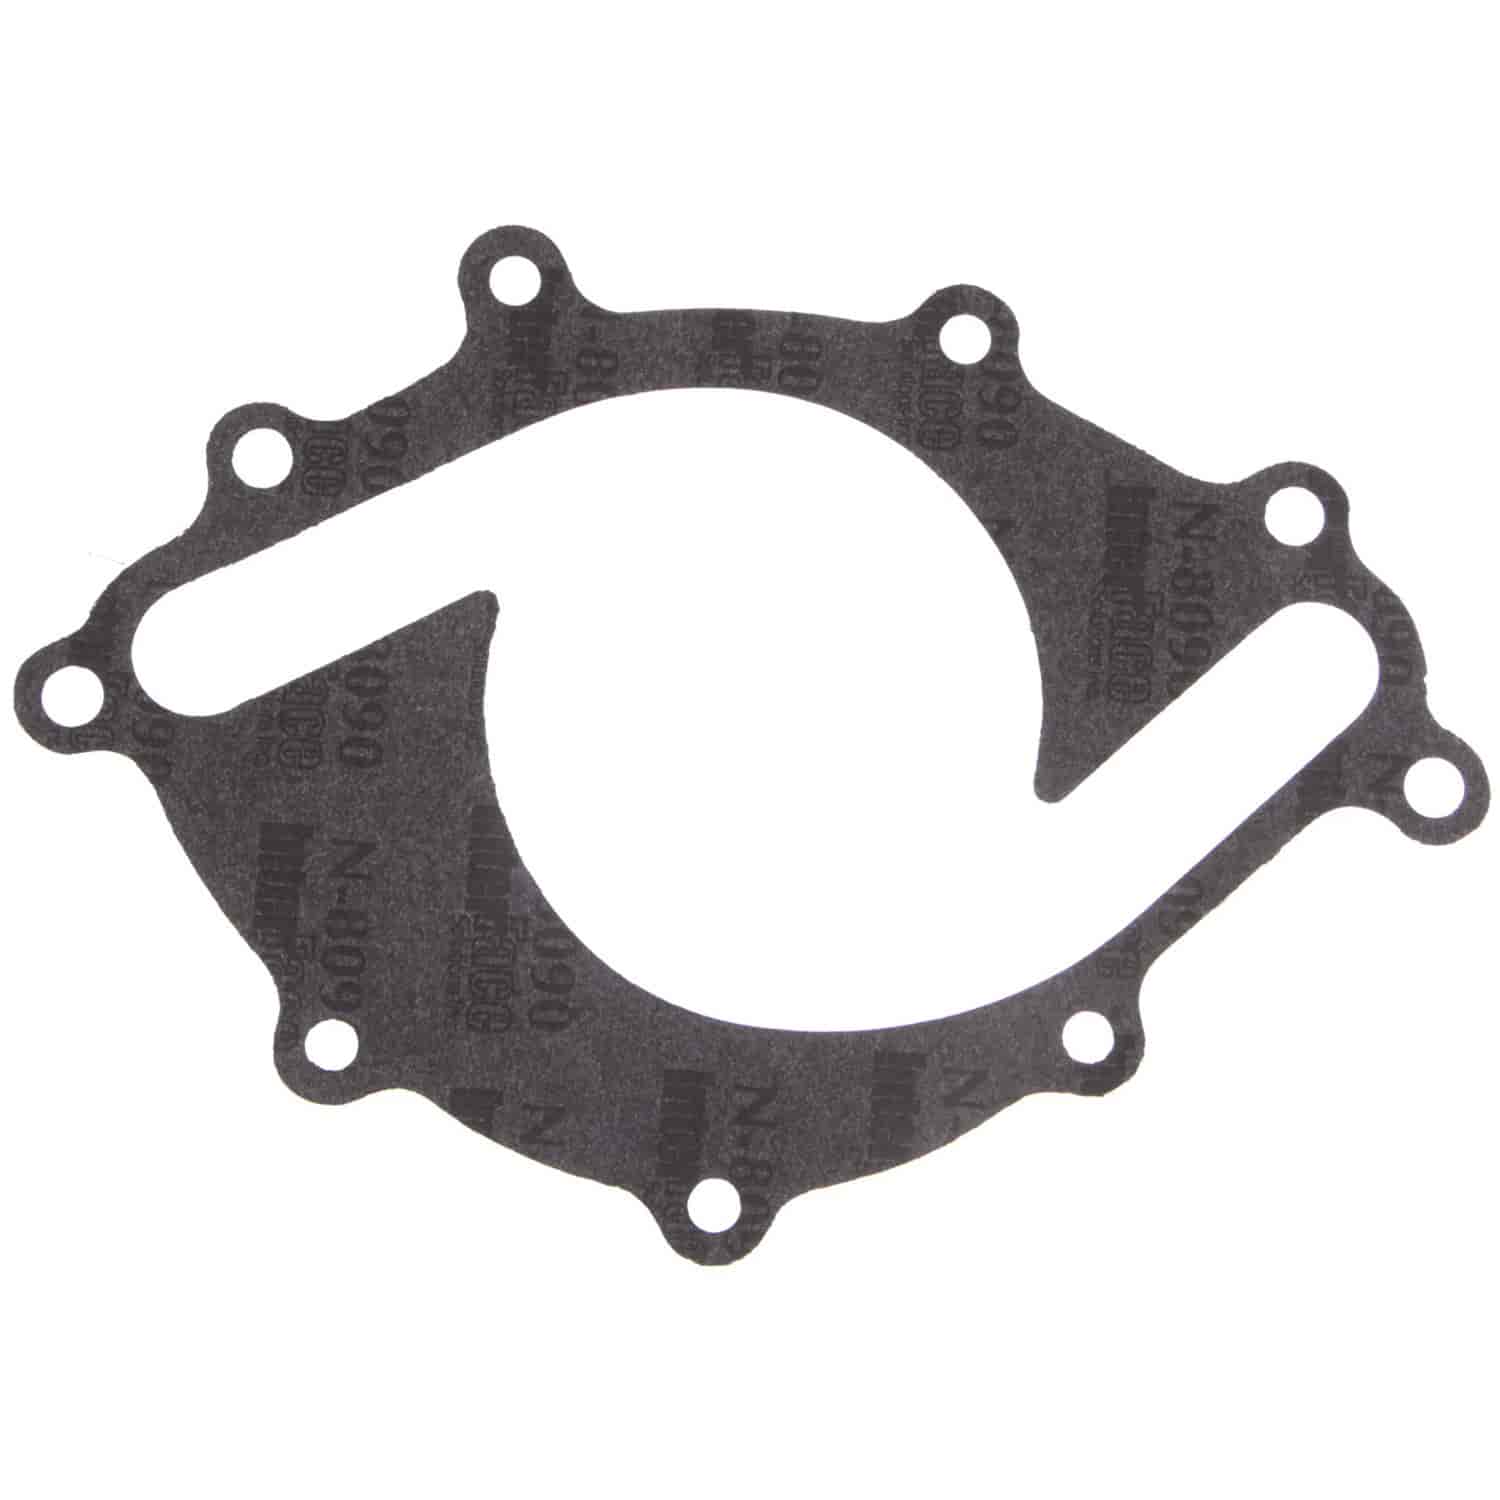 Water Pump Gasket 1986-1997 Small Block Ford 302/351W